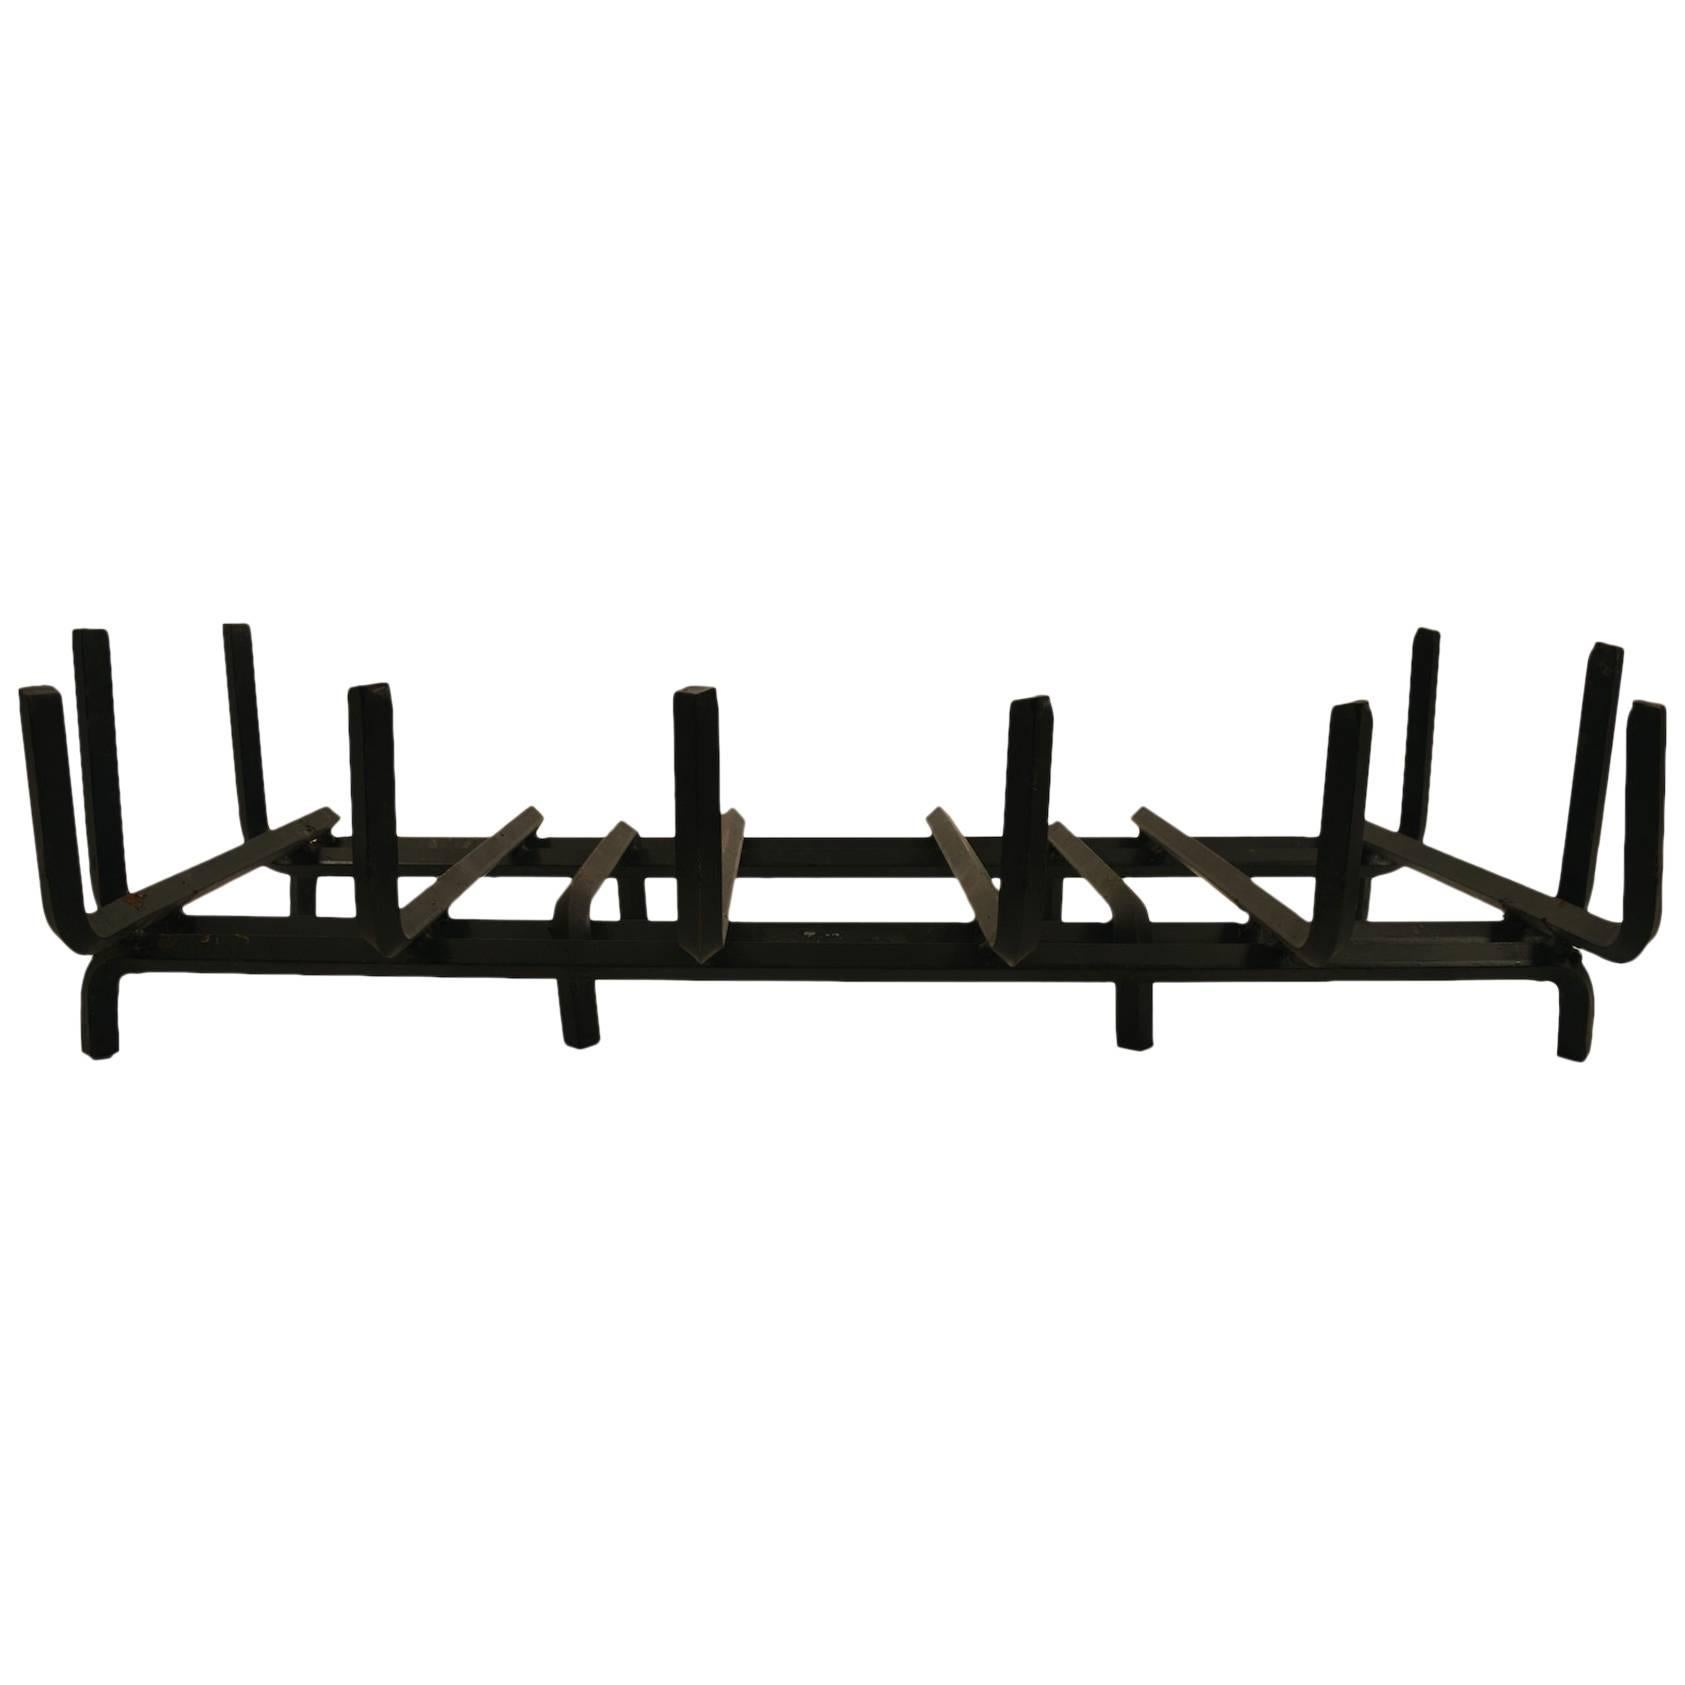 Extra-Large Iron Fireplace Grate Insert